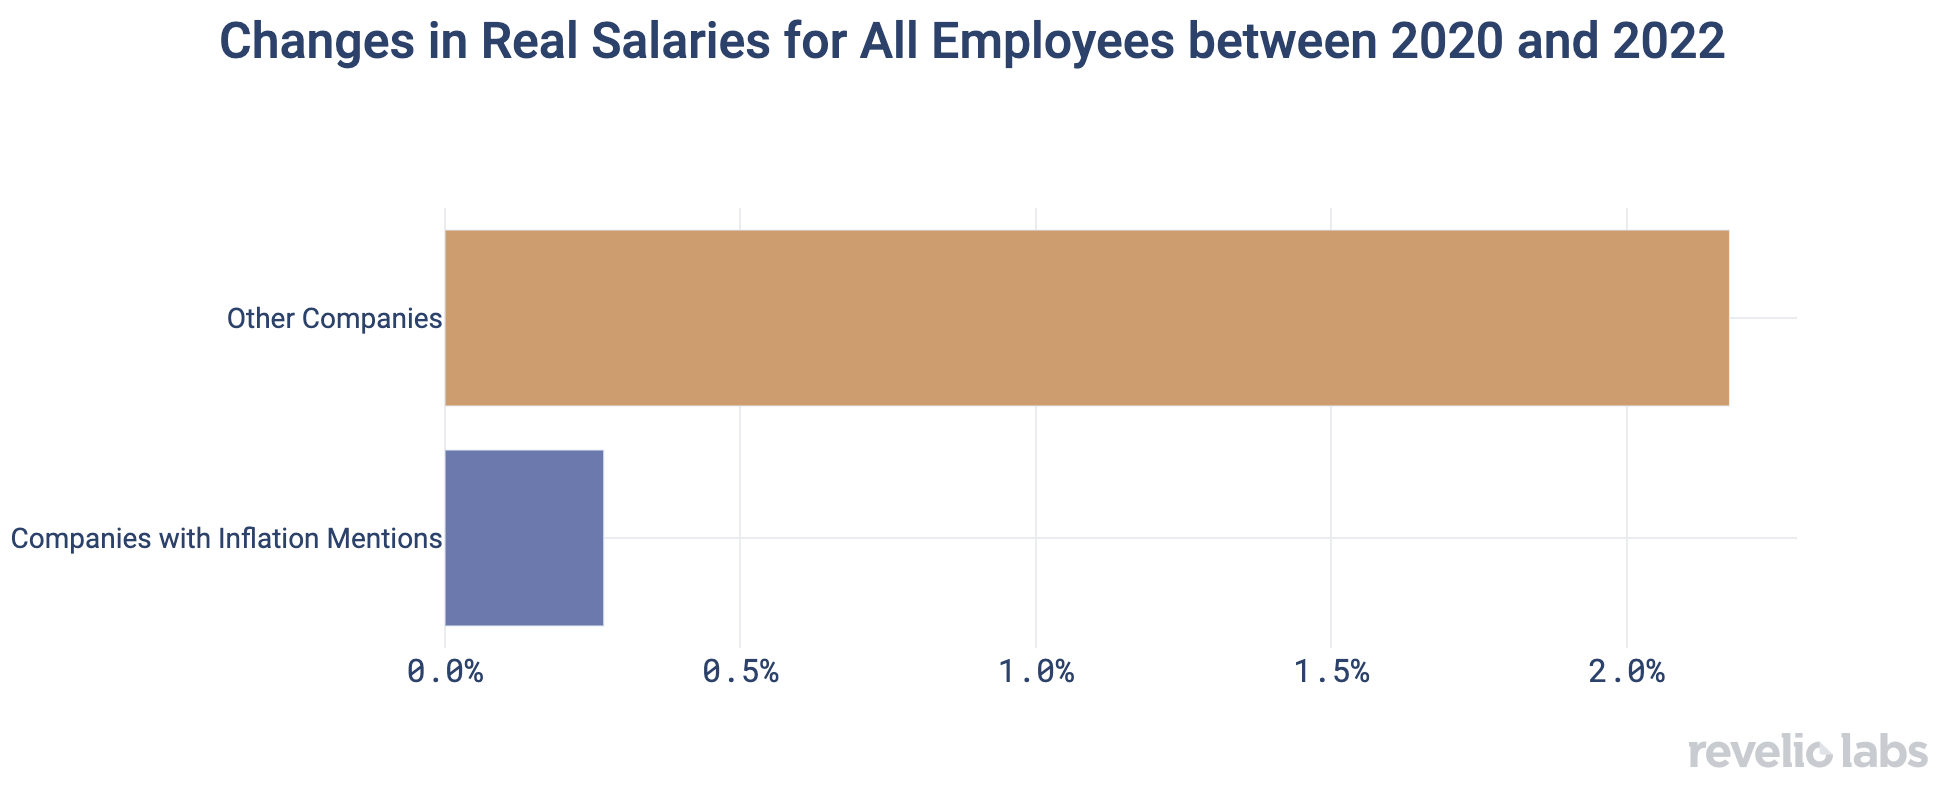 Changes in Real Salaries for All Employees between 2020 and 2022